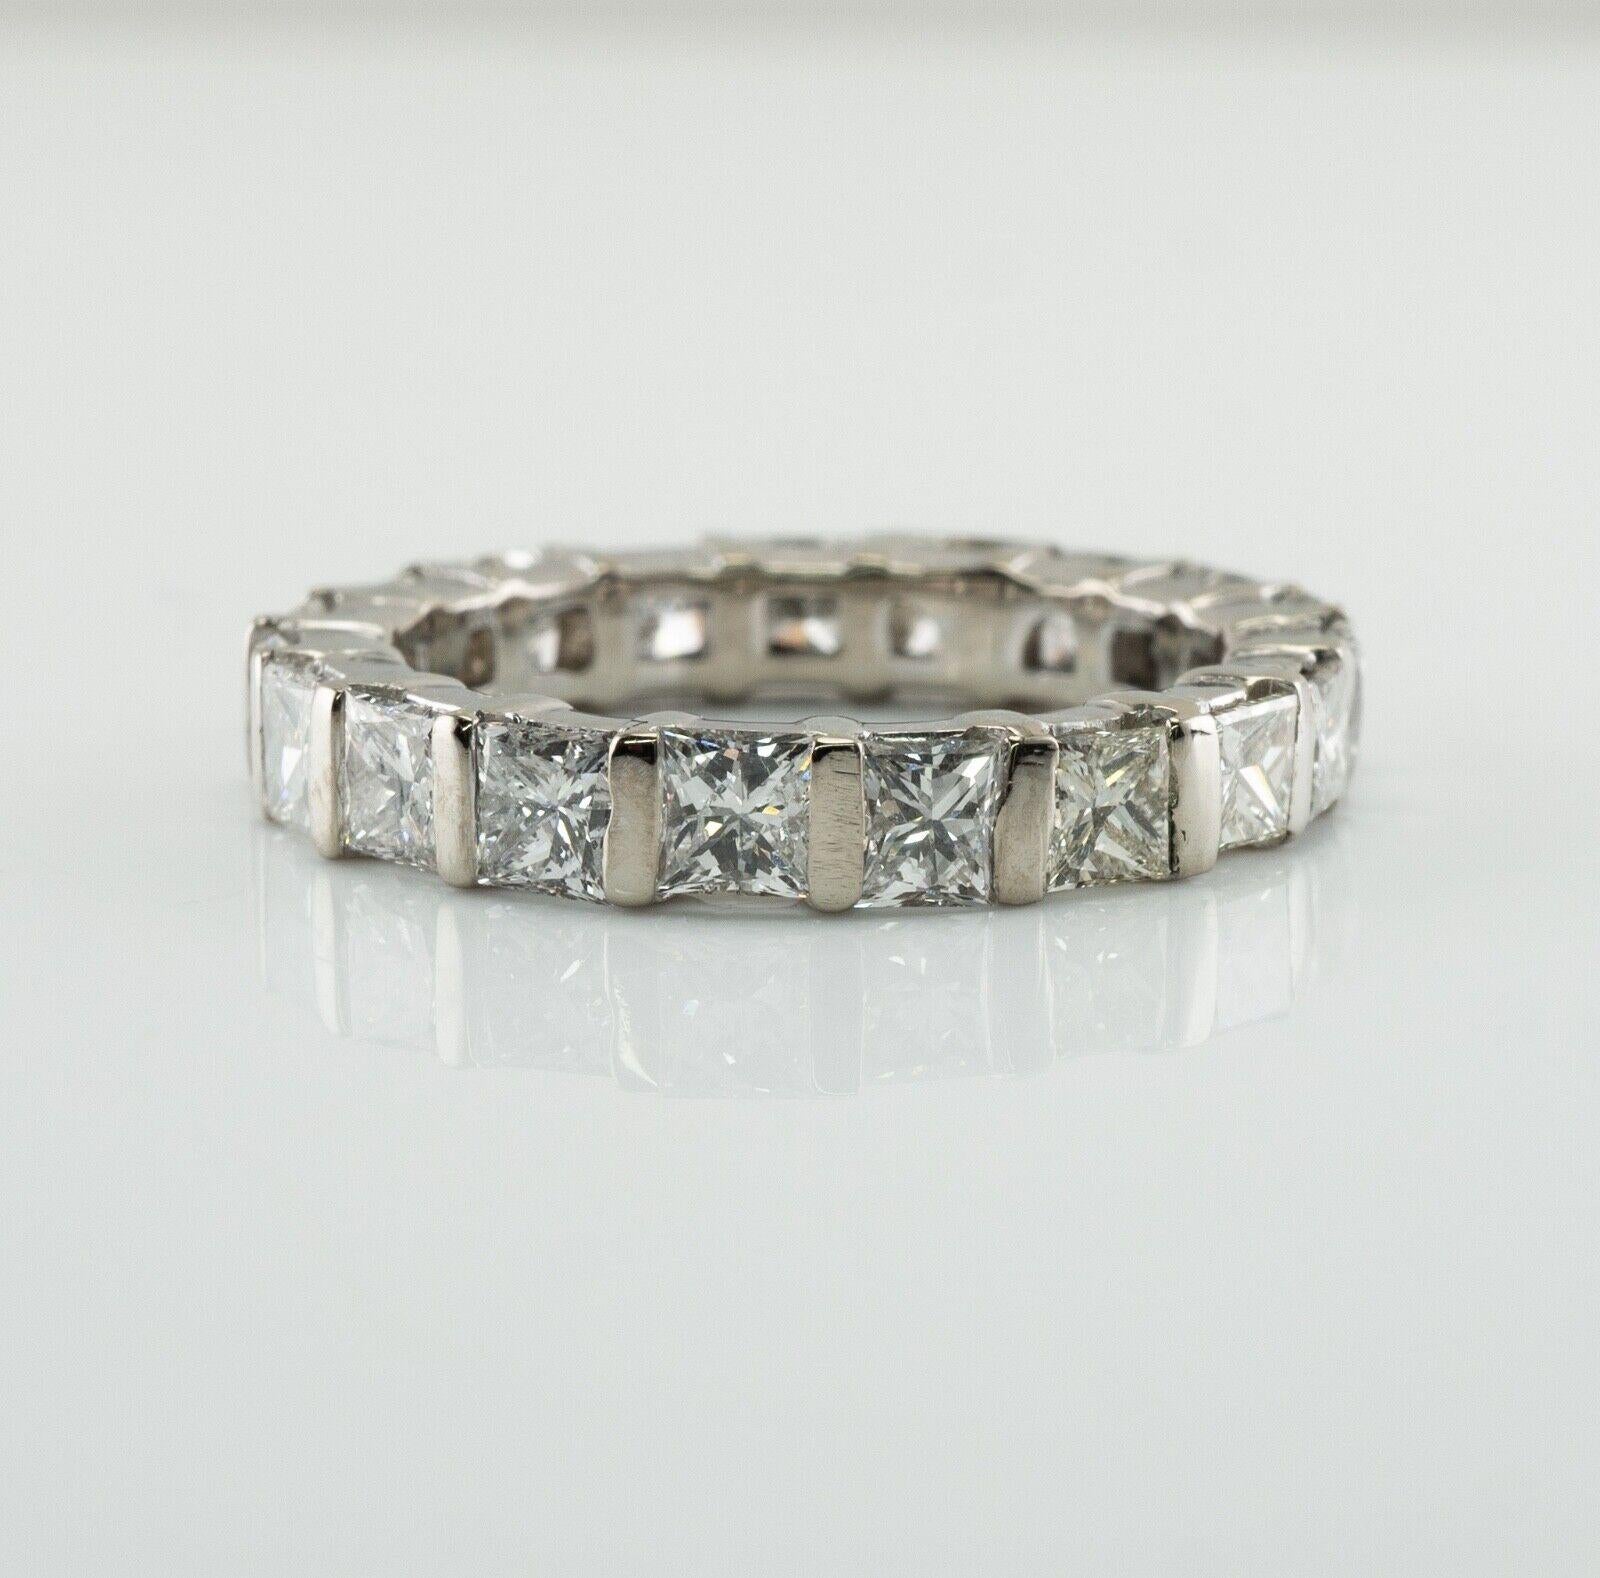 Diamond Ring Geometric 18K White Gold 3.32 TDW

This beautiful estate diamond eternity ring is finely crafted in solid 14K White Gold (carefully tested and guaranteed) and set with nineteen square-cut diamonds. All diamonds go around, no beginning,